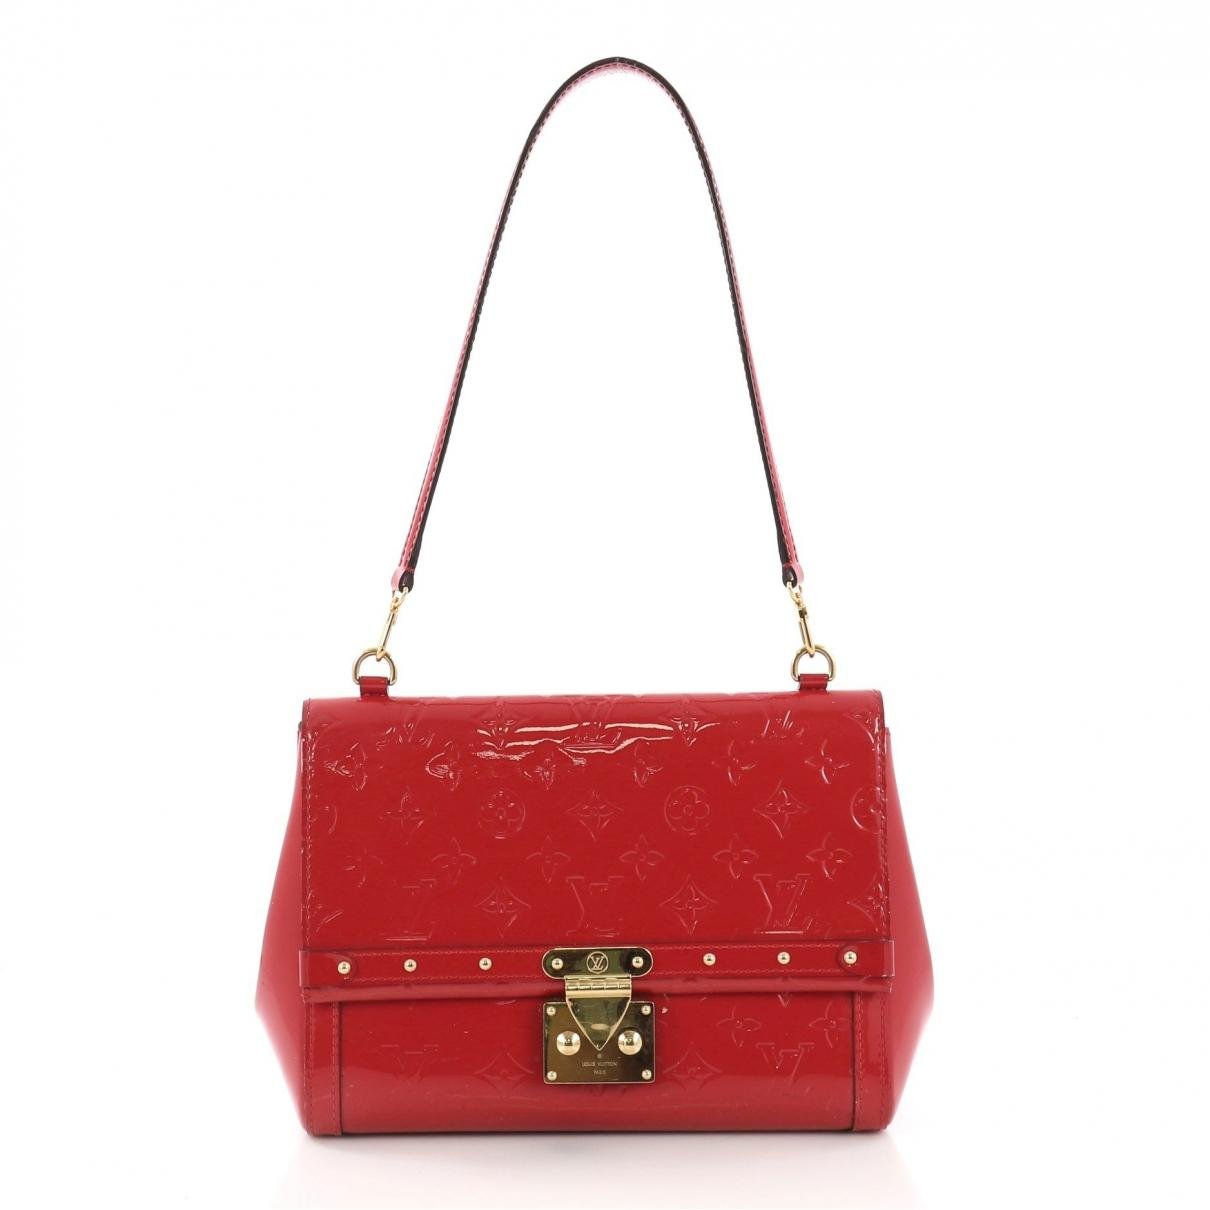 Louis Vuitton Venice Patent Leather Handbag in Red - Lyst